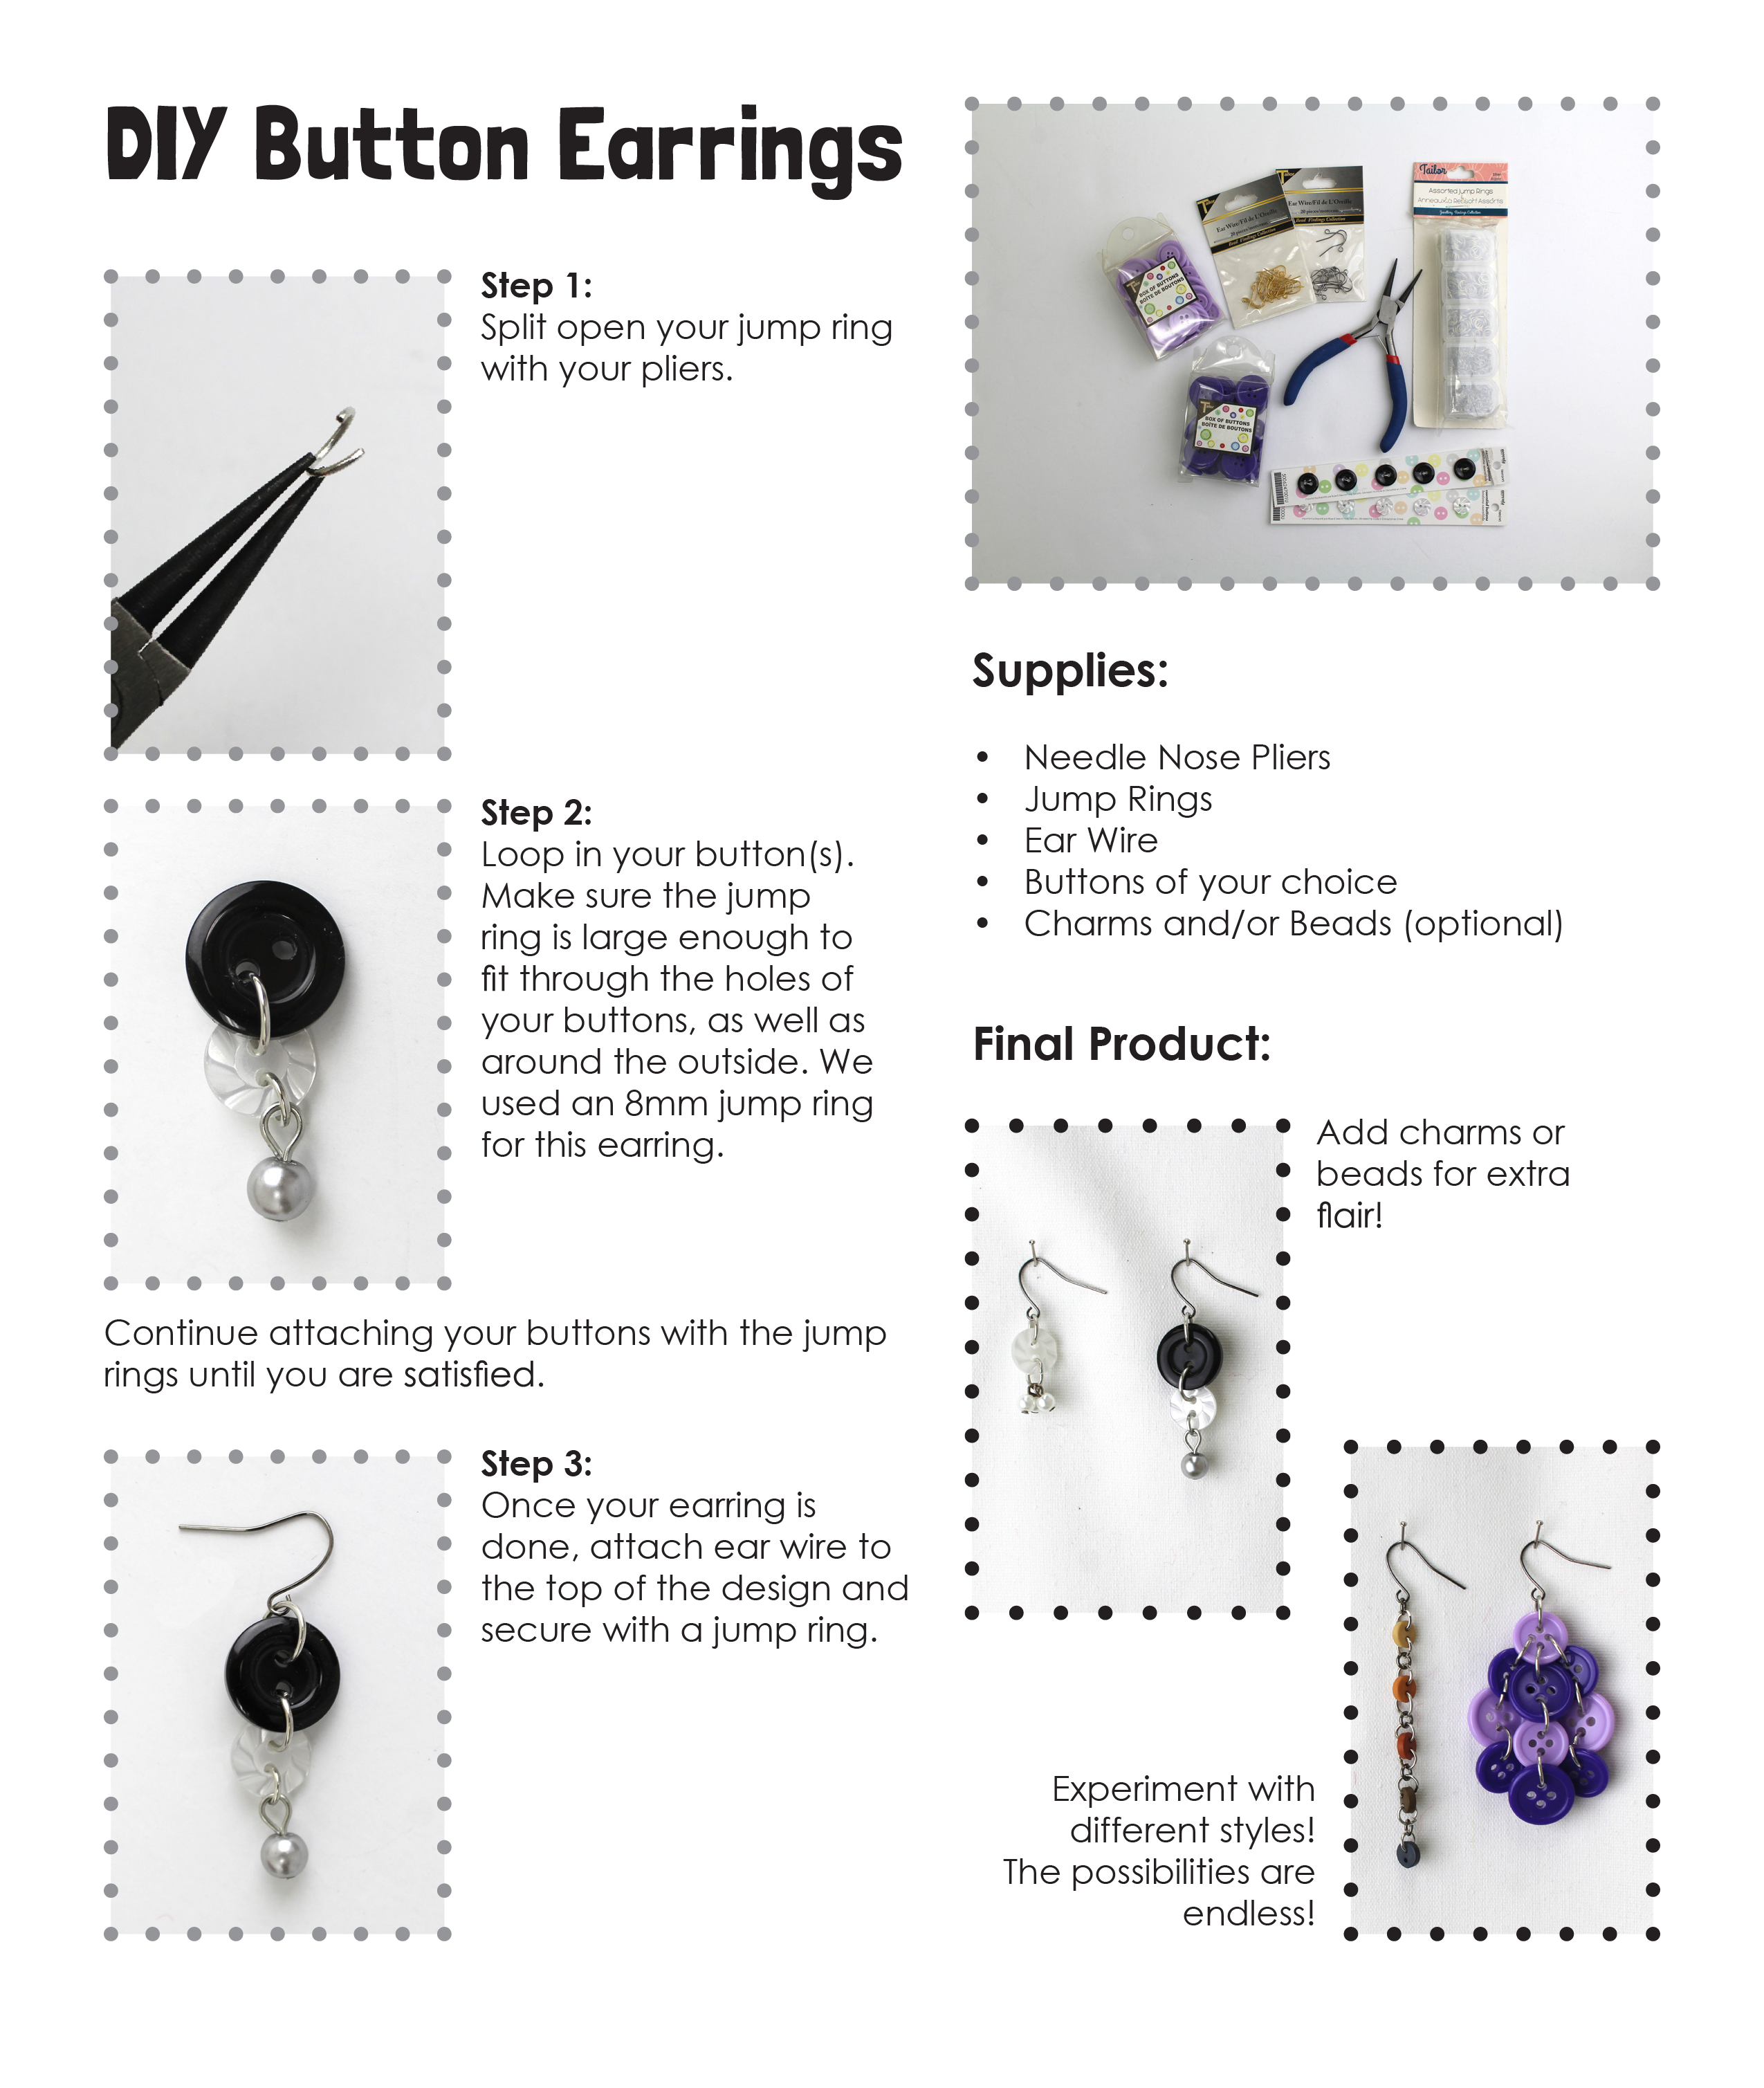 Steps to create your button earrings